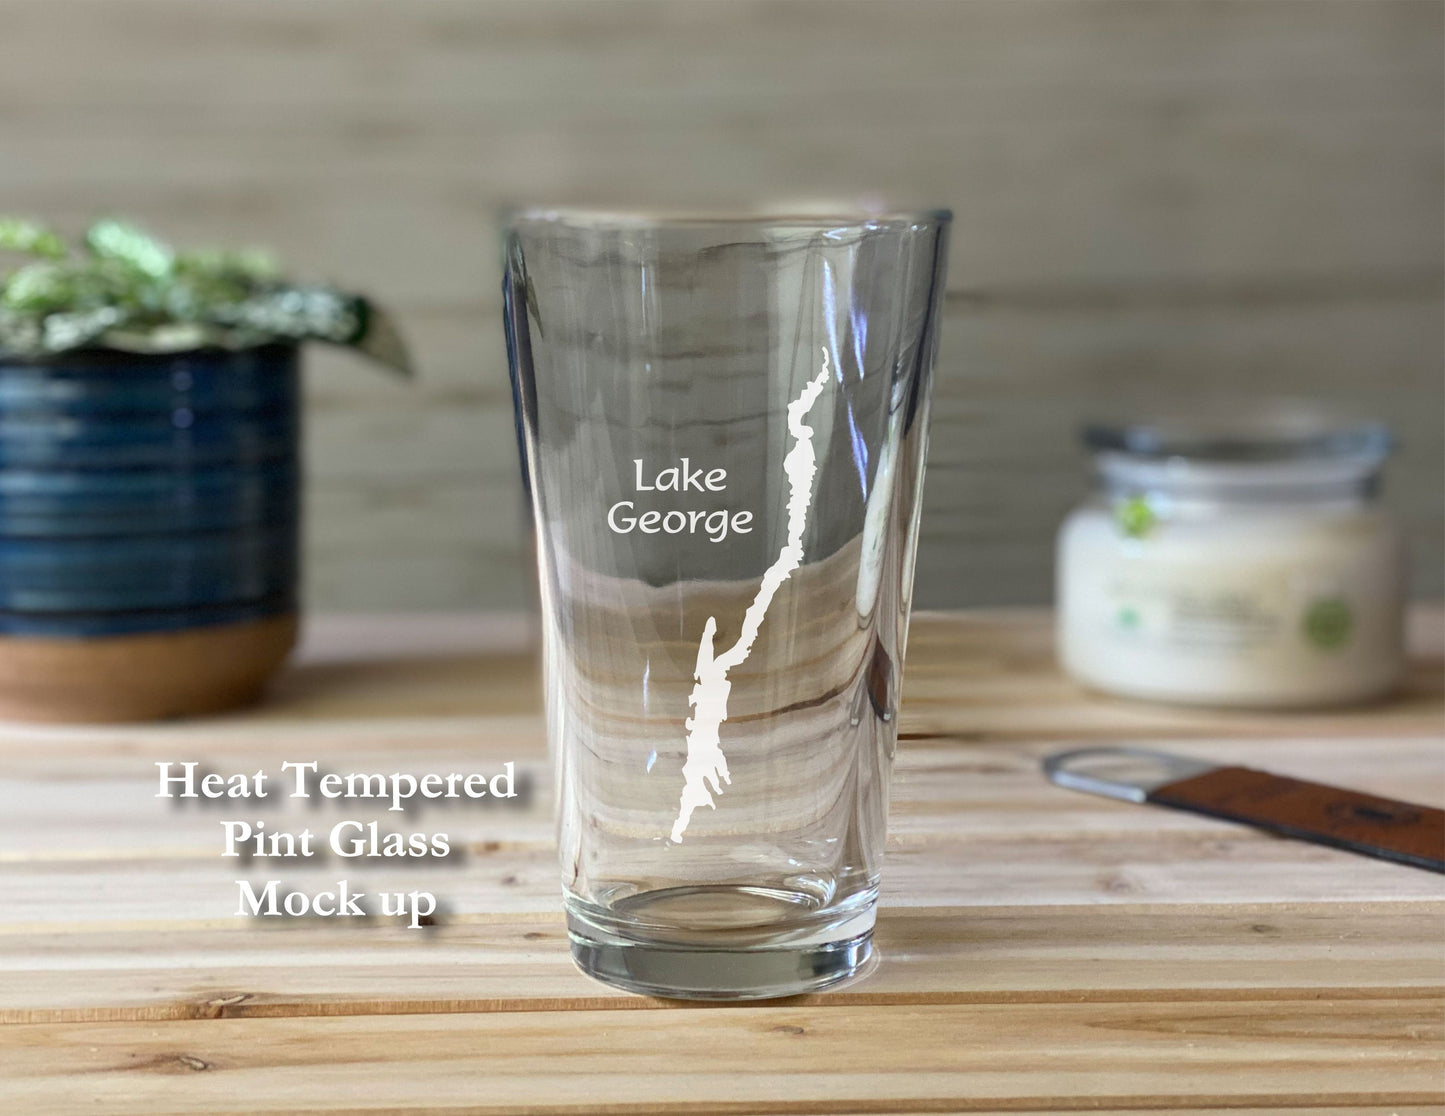 Lake George New York with Words - pint glass